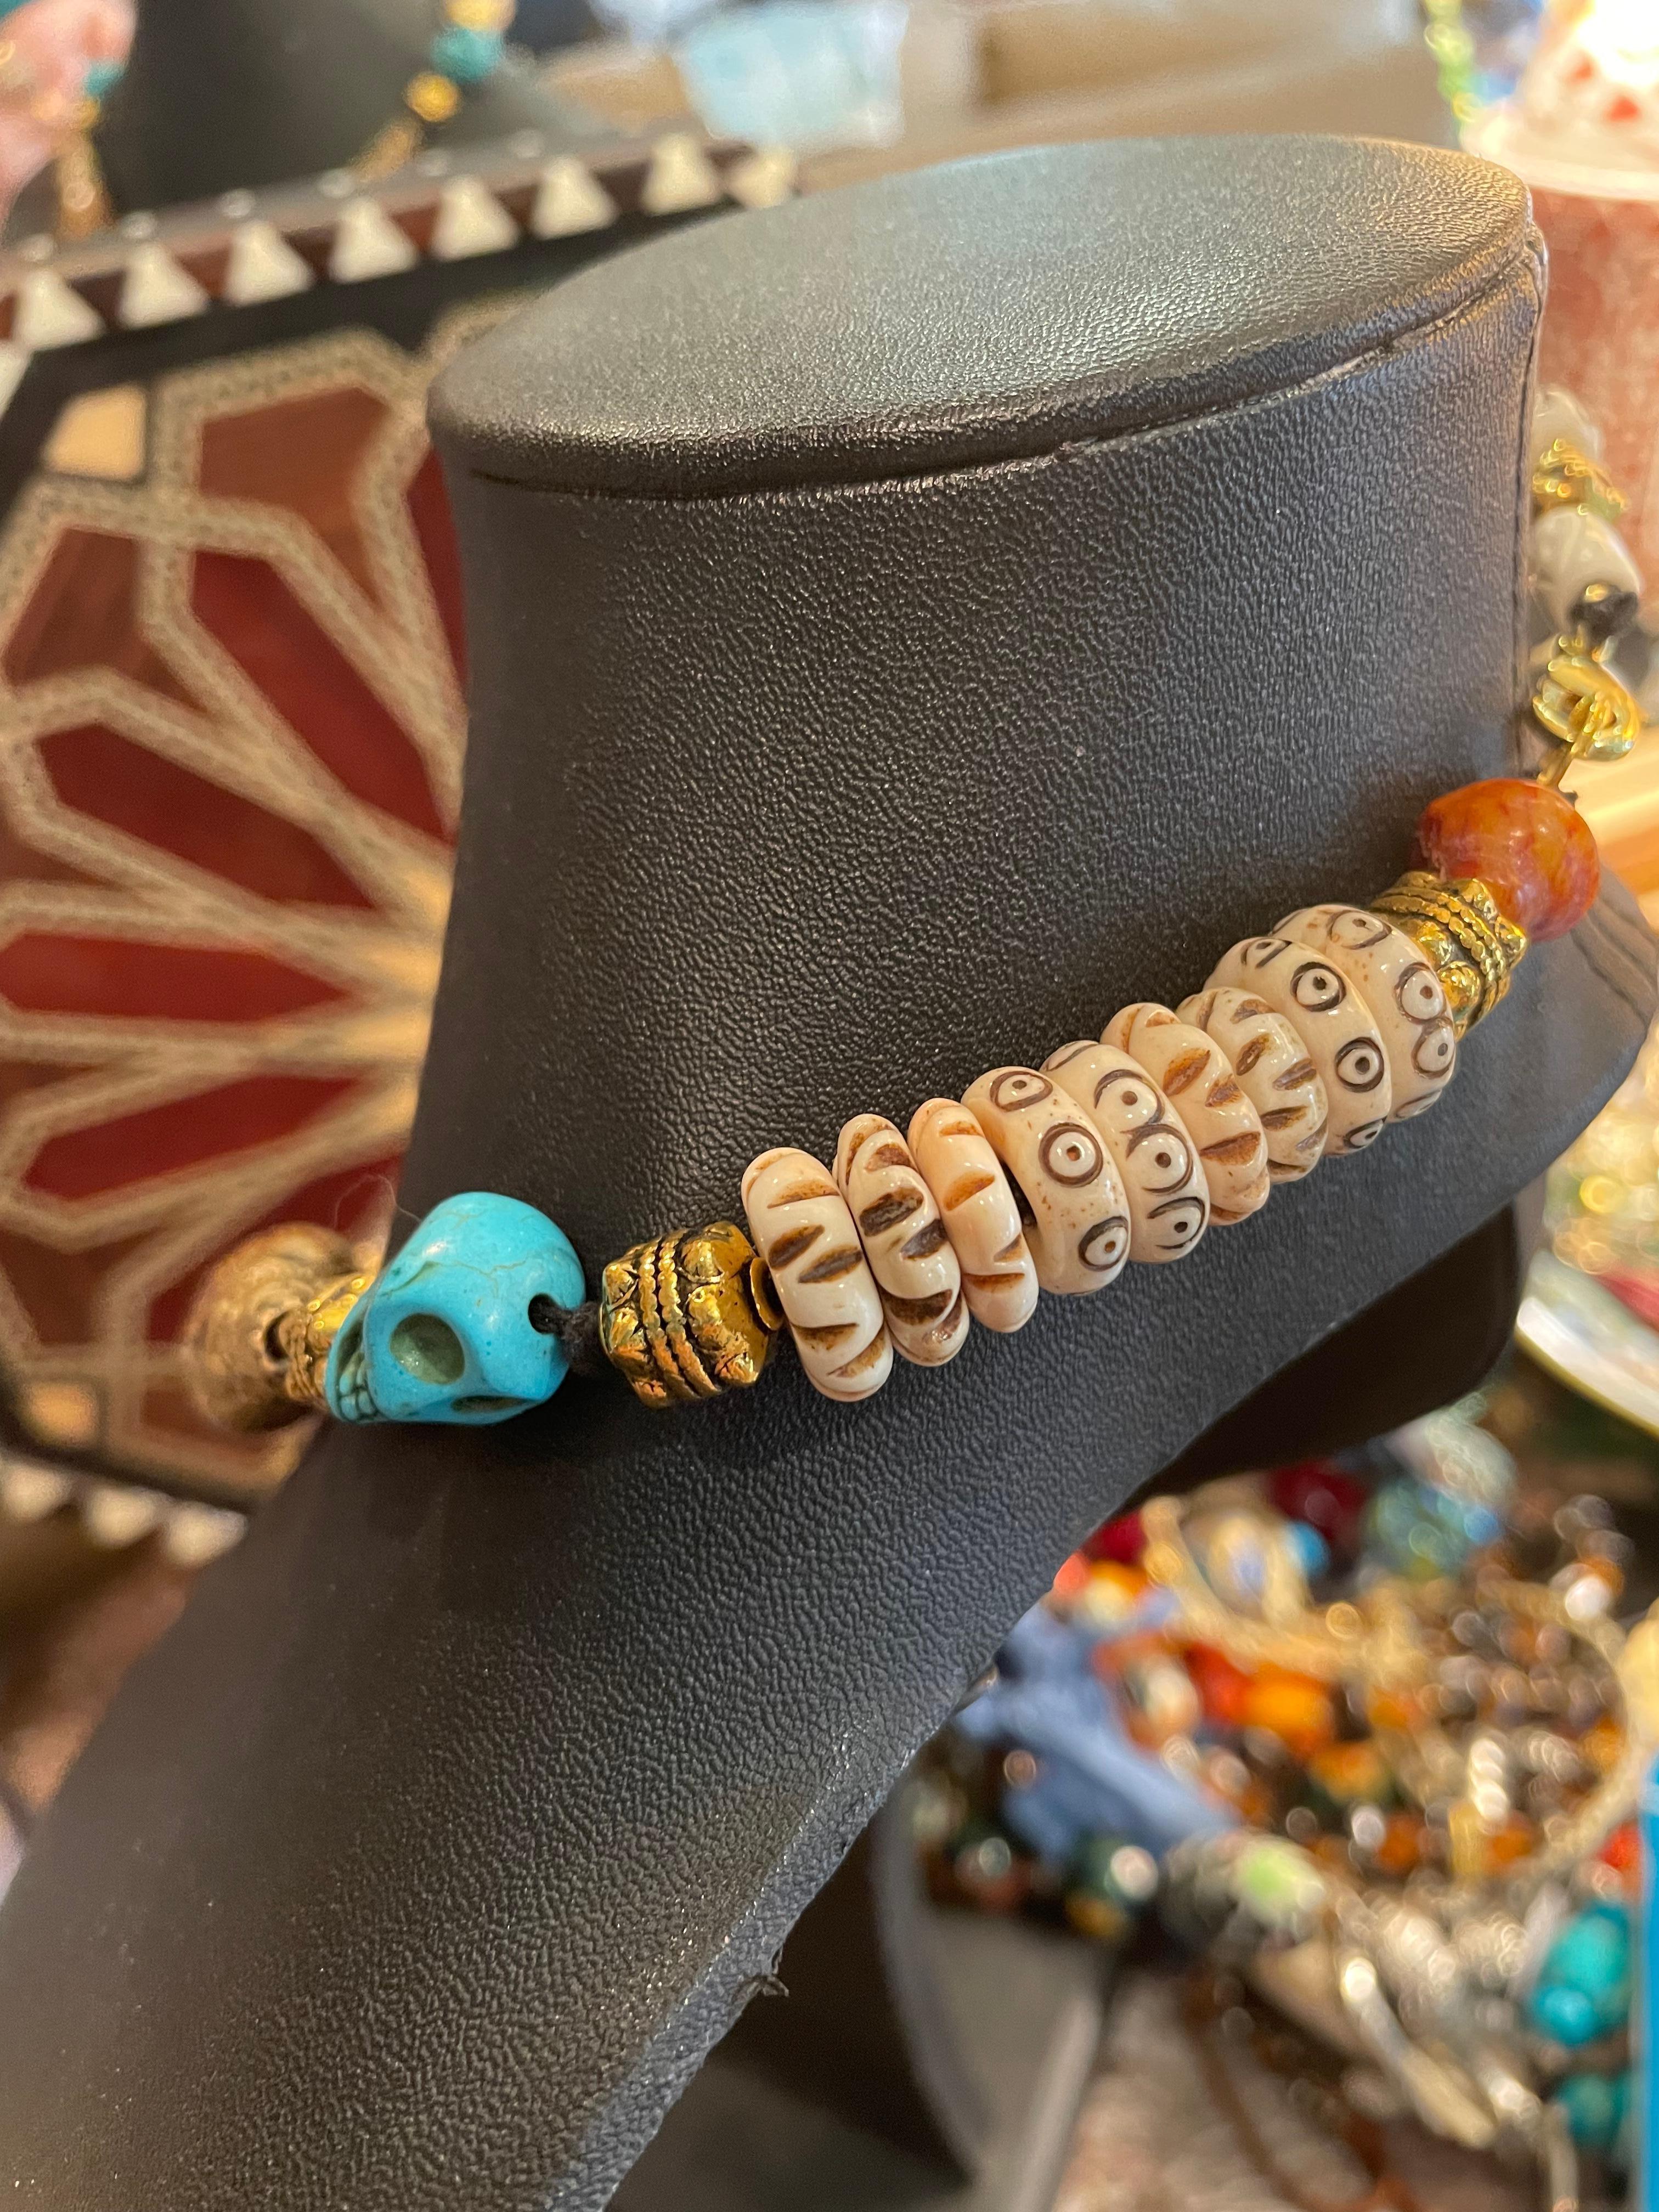 Large Tibetan brass and Amber handmade pendant with turquoise stone skull beads,antique Indian agate and brass 
Beads, and bone discs comprise this handmade, one of a kind, necklace.This stunning and dramatic piece will definitely make you stand out